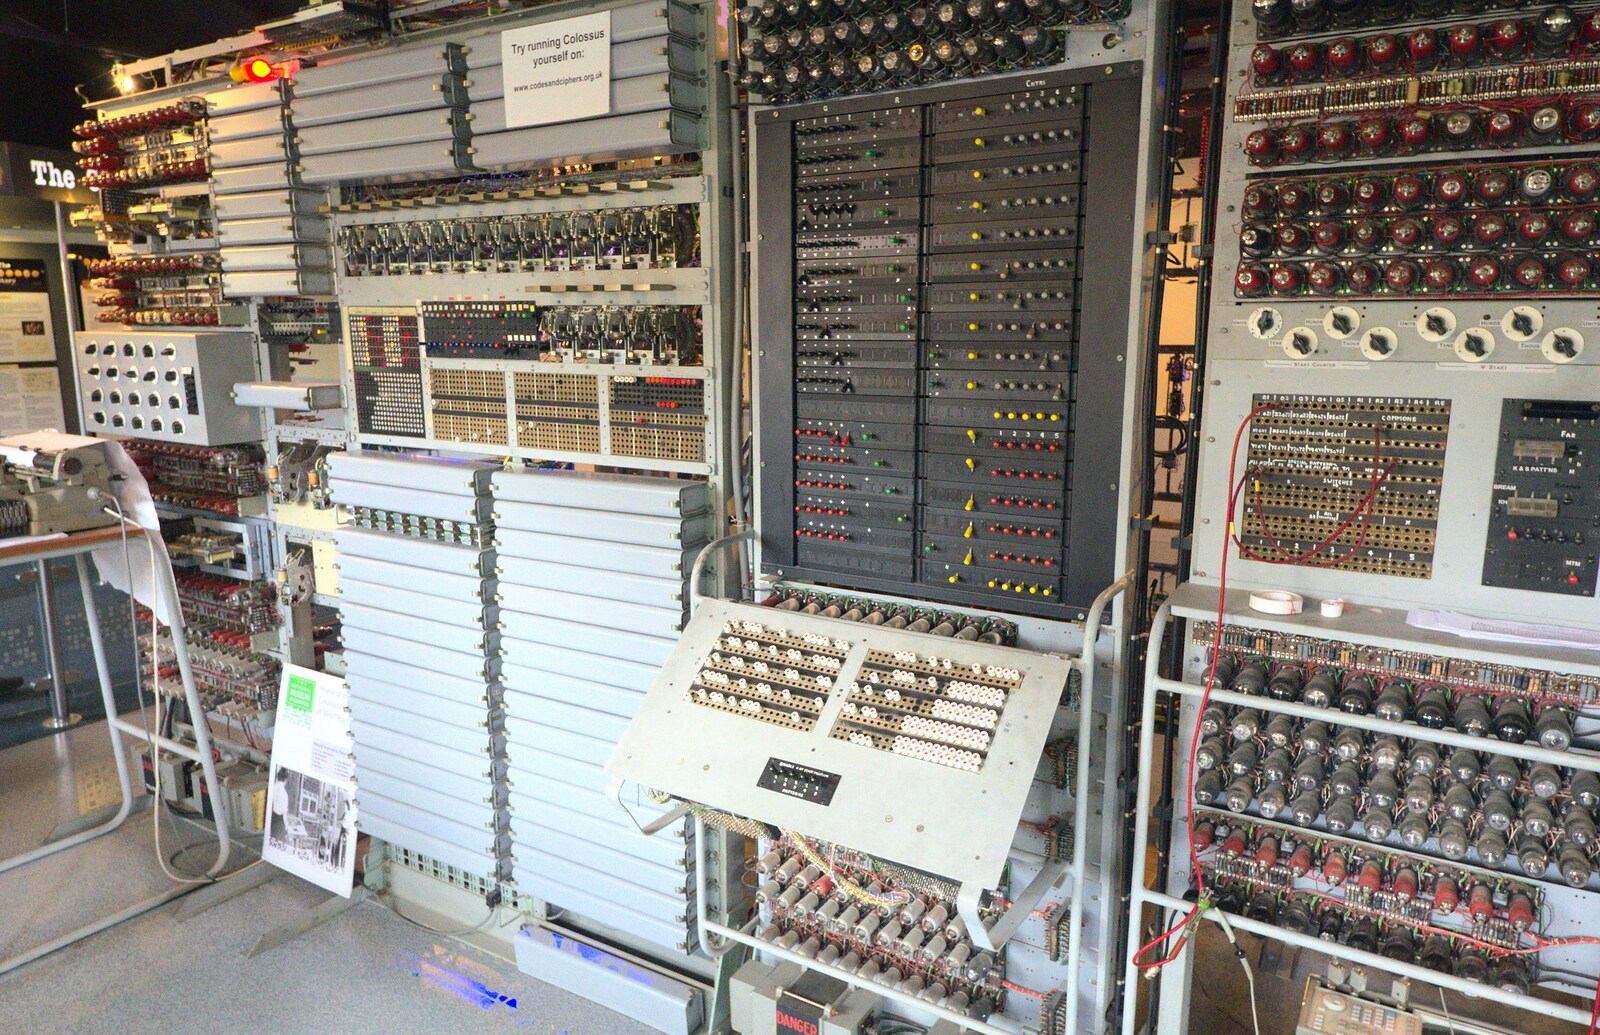 More Colossus from TouchType does Bletchley Park, Bletchley, Bedfordshire - 20th July 2012